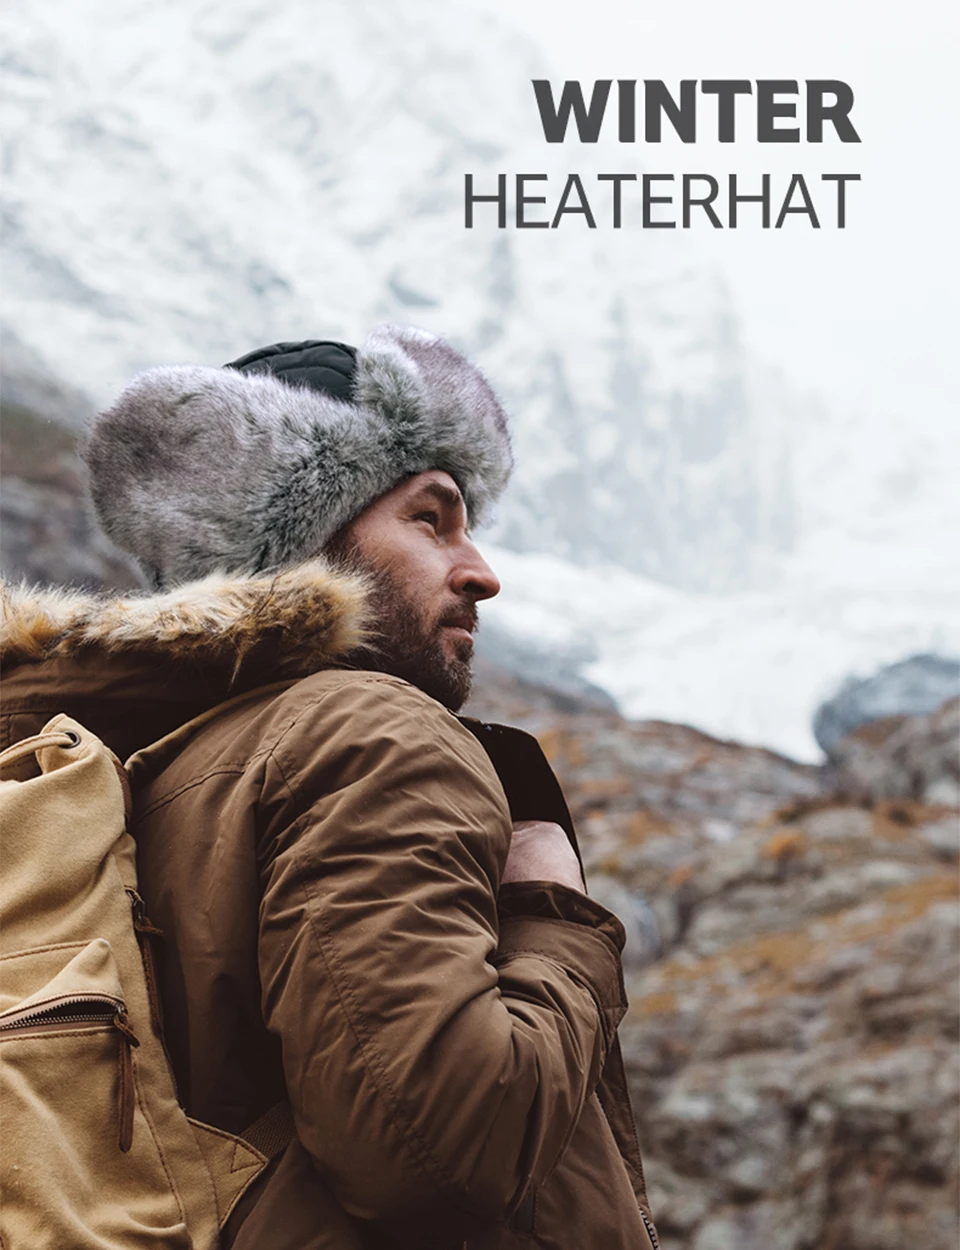 Naturehike Thickening Warm Winter Hat Warm Waterproof Unisex Ear Protection Outdoor Windproof Cold Camping Travel Climing Hat • FISHISHERE